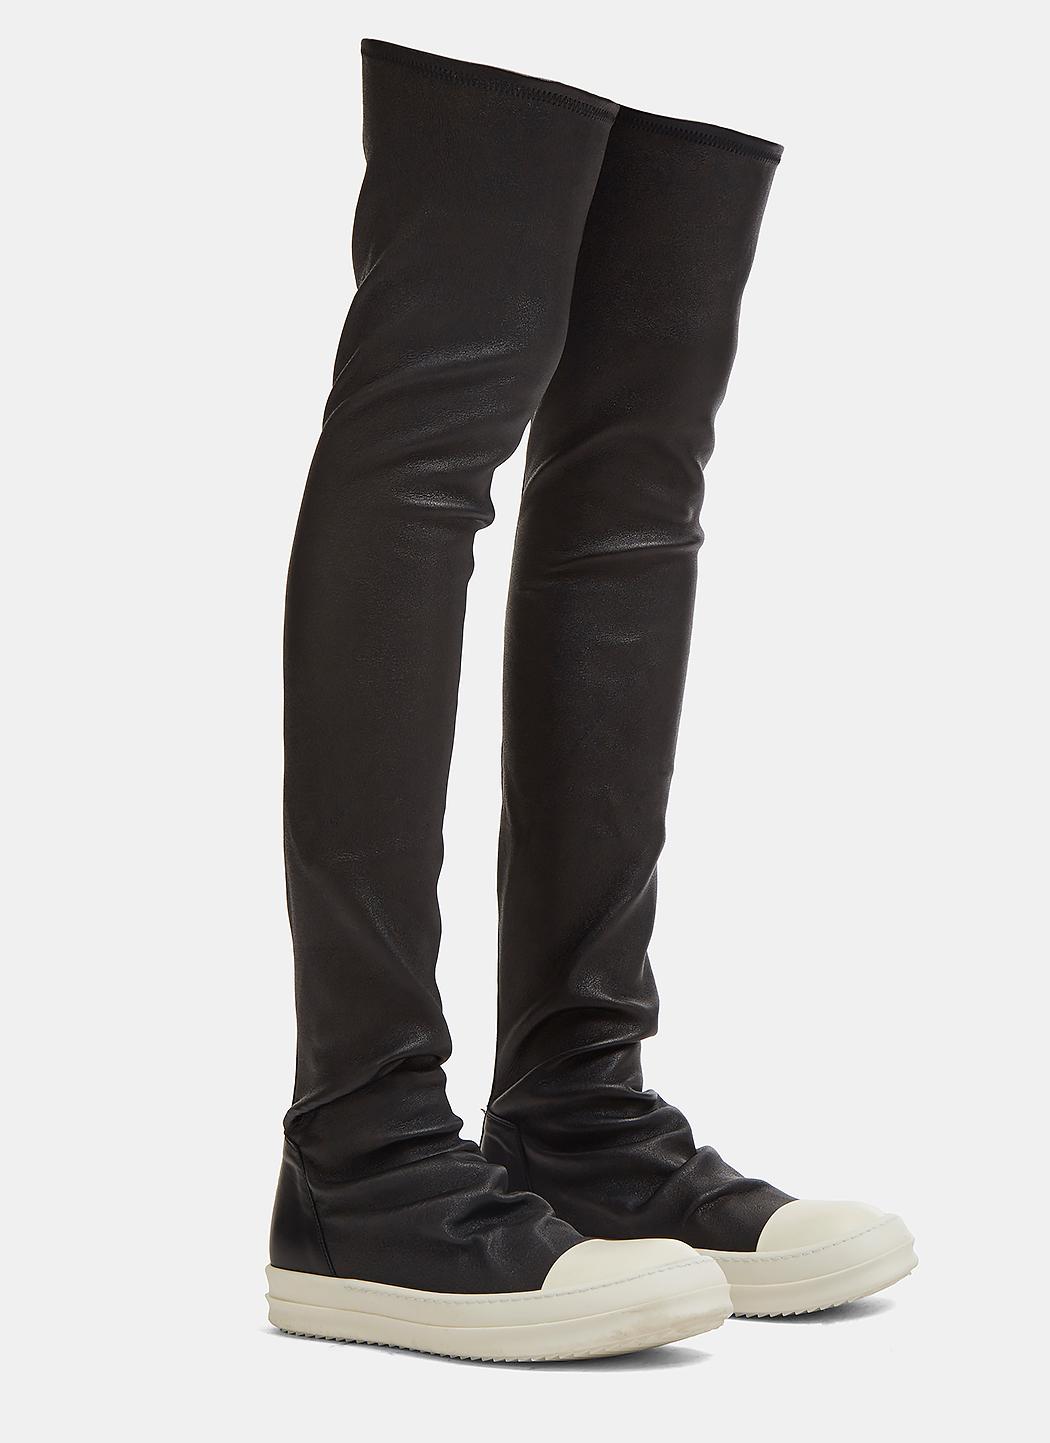 Lyst - Rick Owens Knee Boots in Black